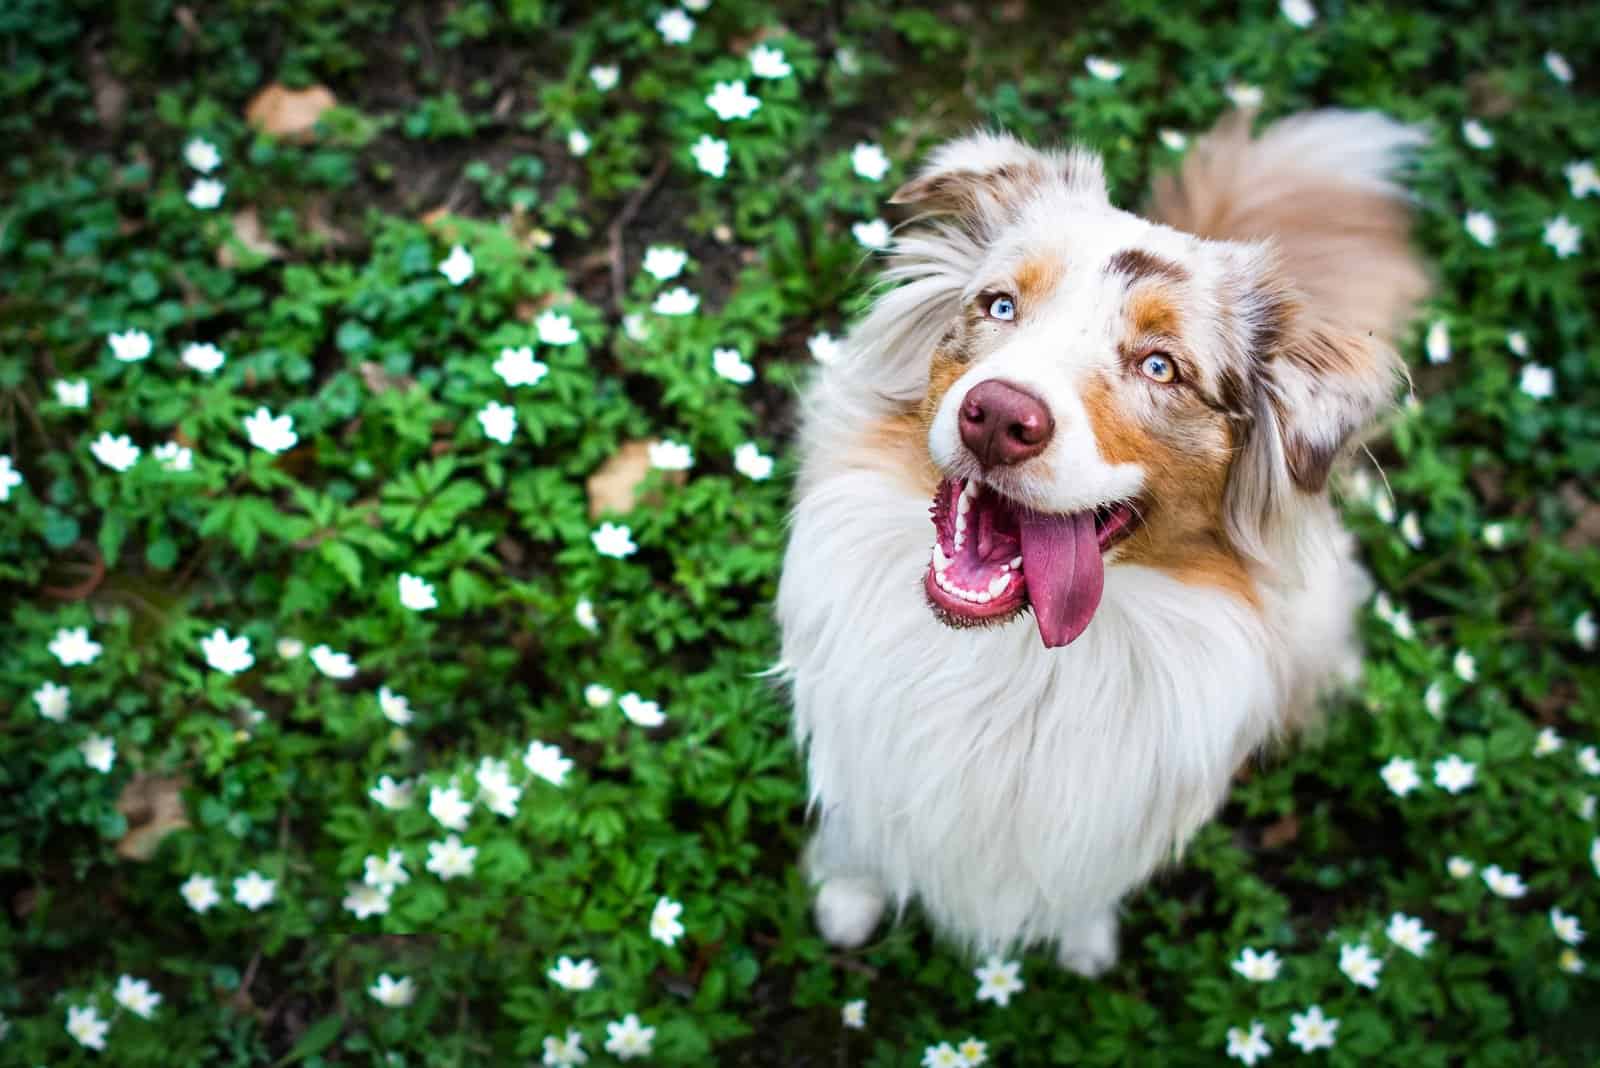 Red Merle Australian Shepherd sits in the grass and looks at the camera